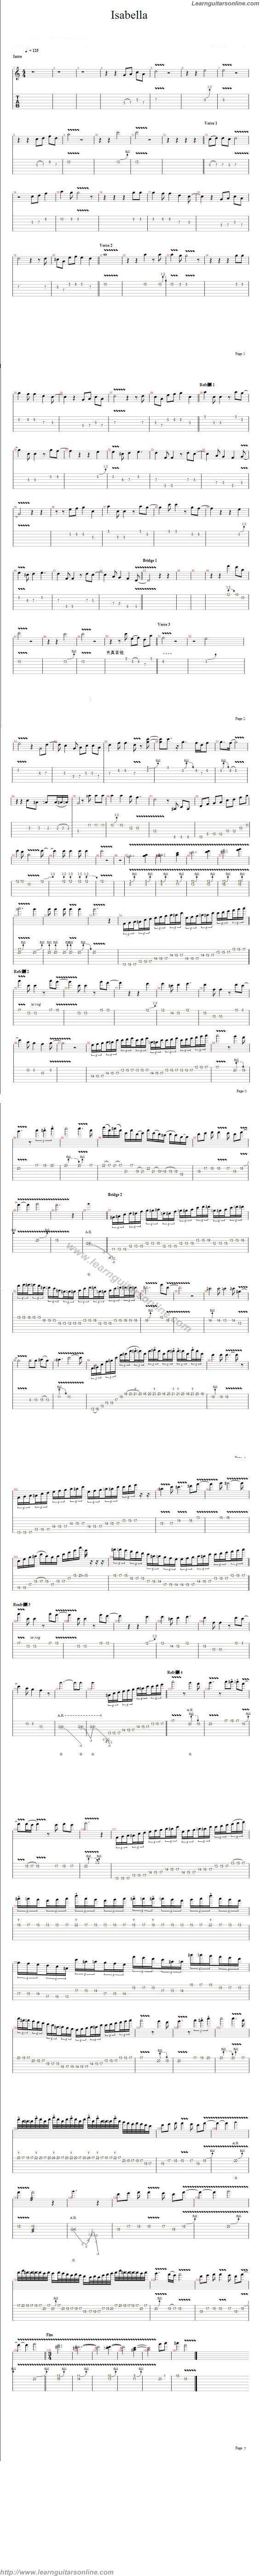 Isabella by Ozielzinho Guitar Tabs Chords Solo Notes Sheet Music Free